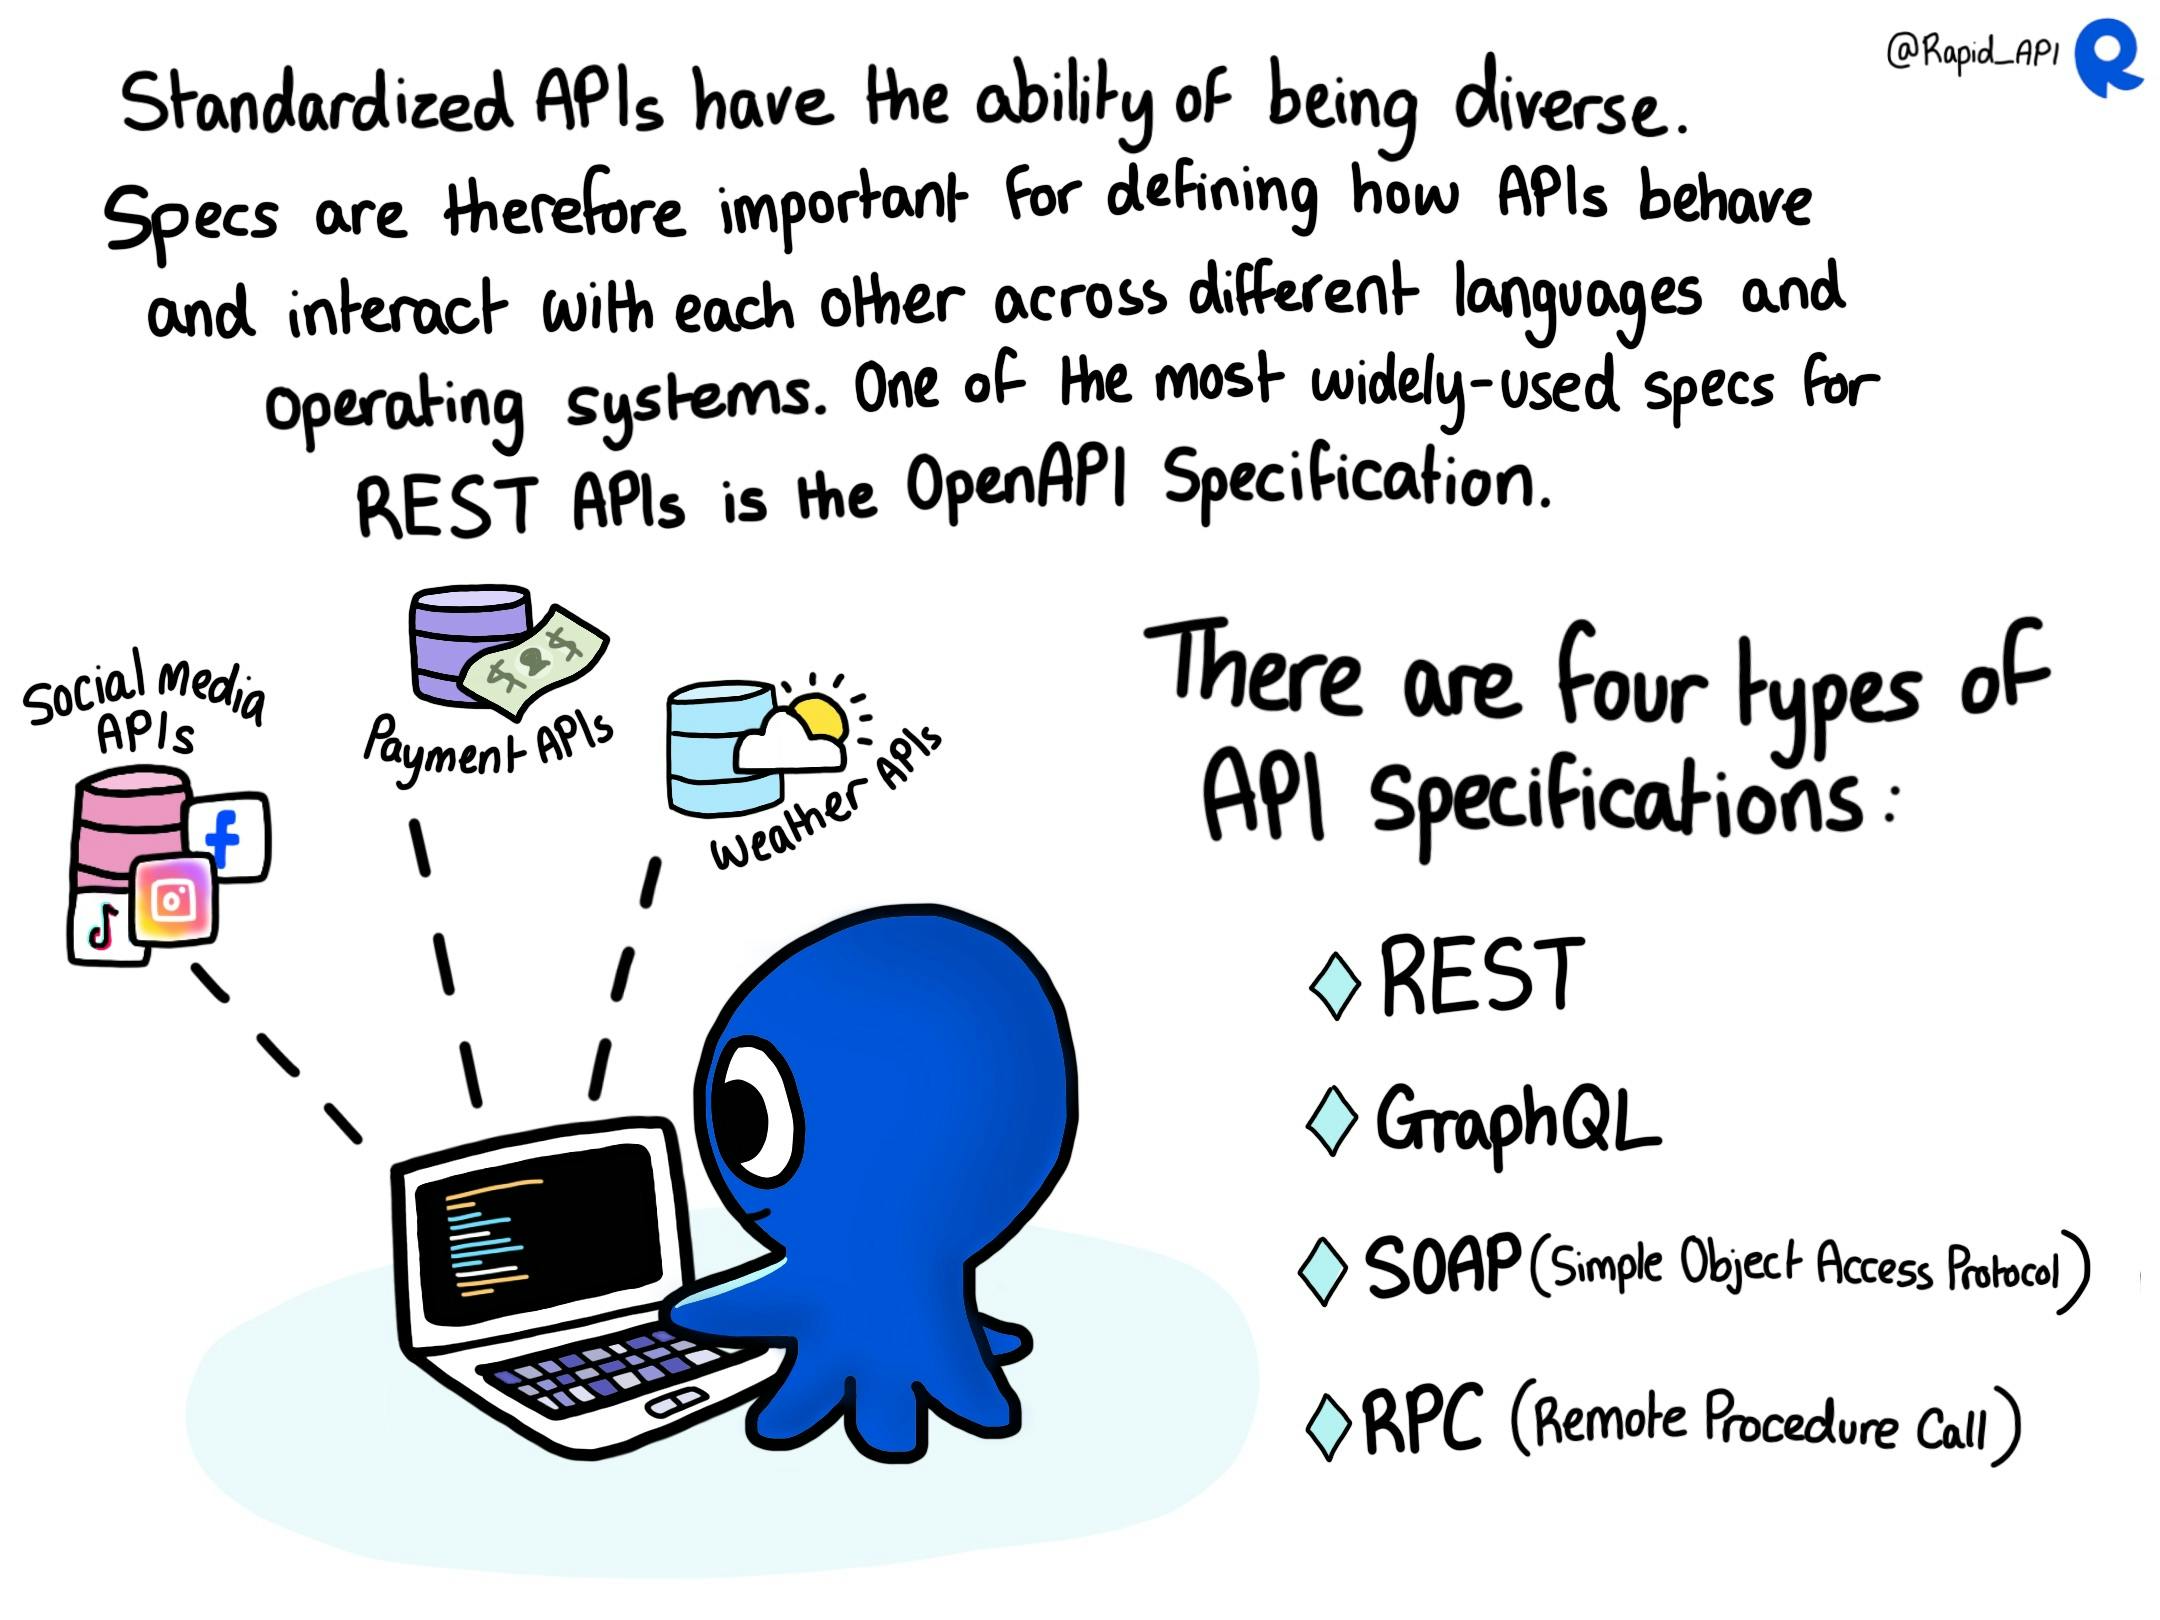 API Specifications